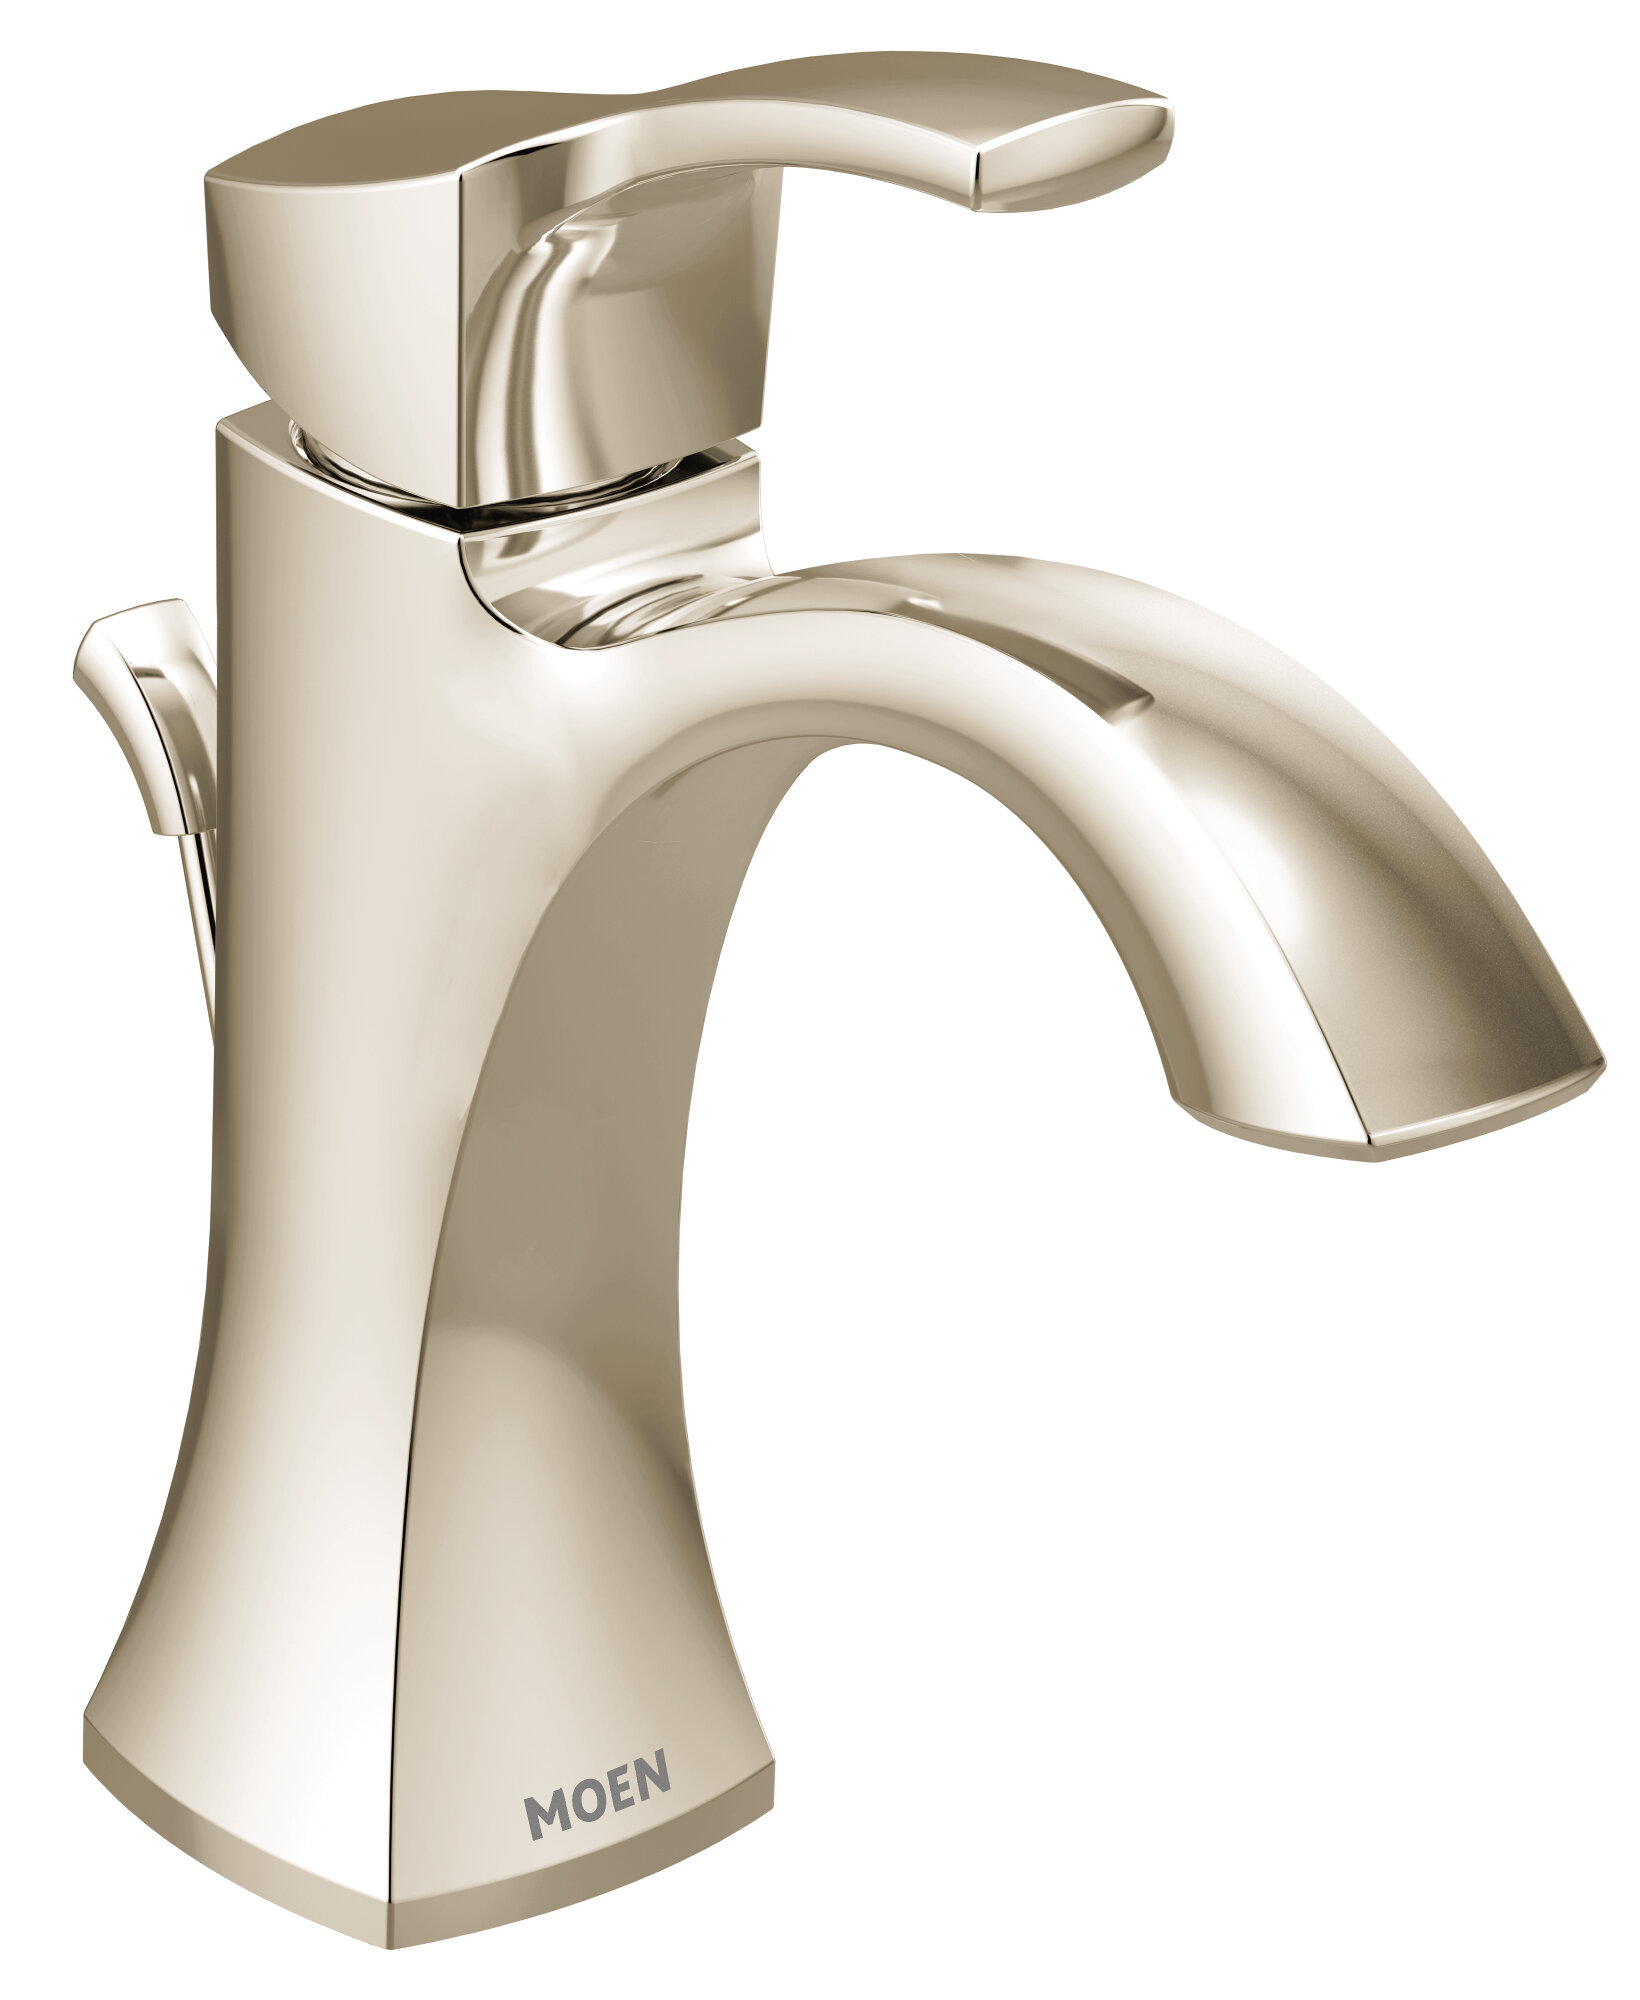 Moen Voss 1 Handle High Arc Bathroom Faucet With Drain Assembly